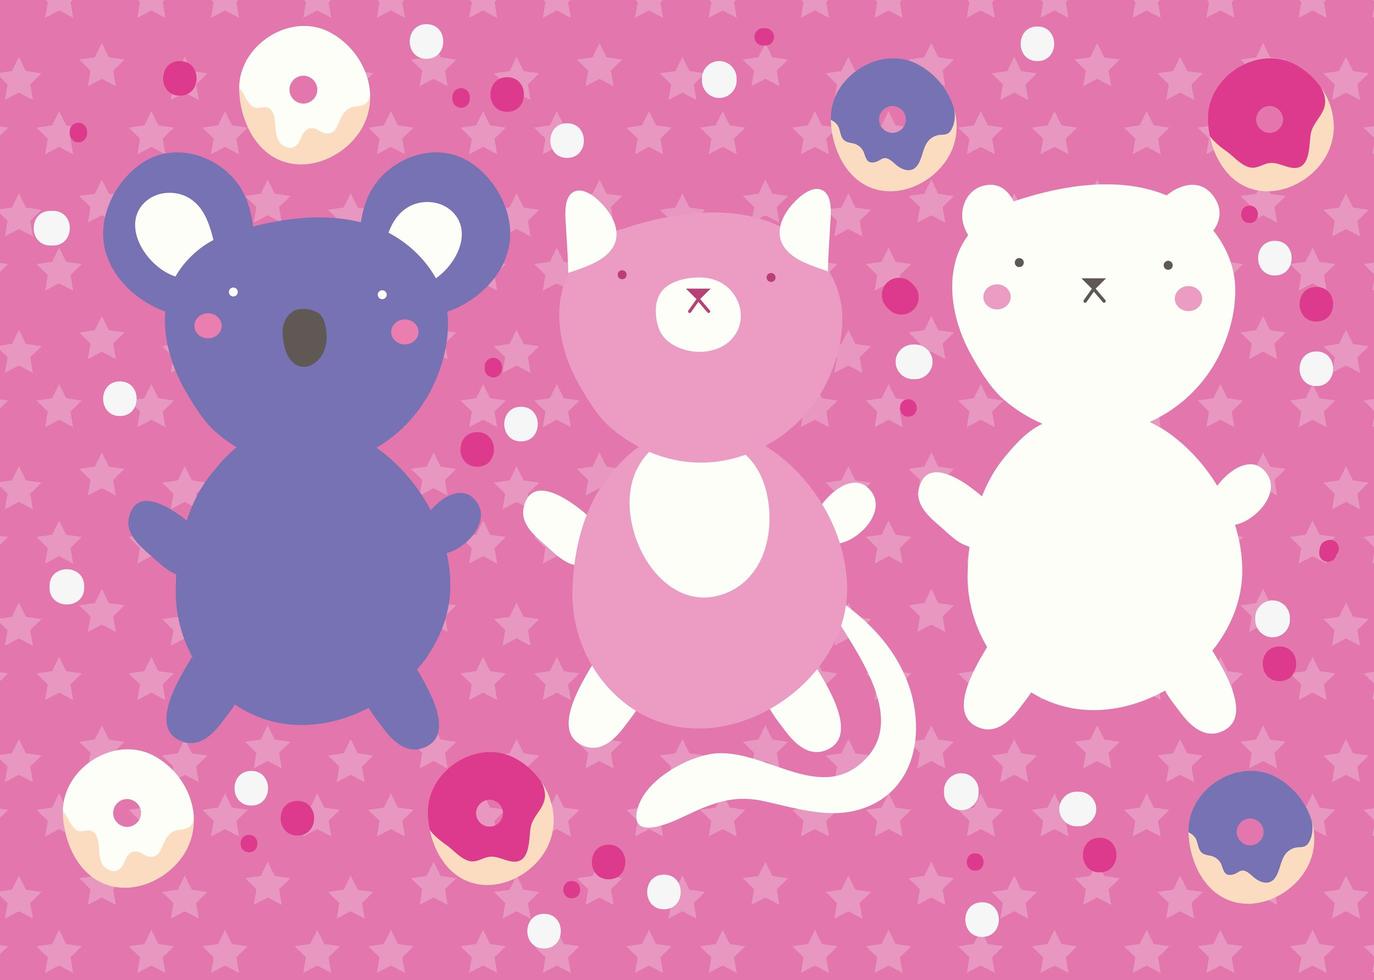 cute kawaii design with animals and donuts vector